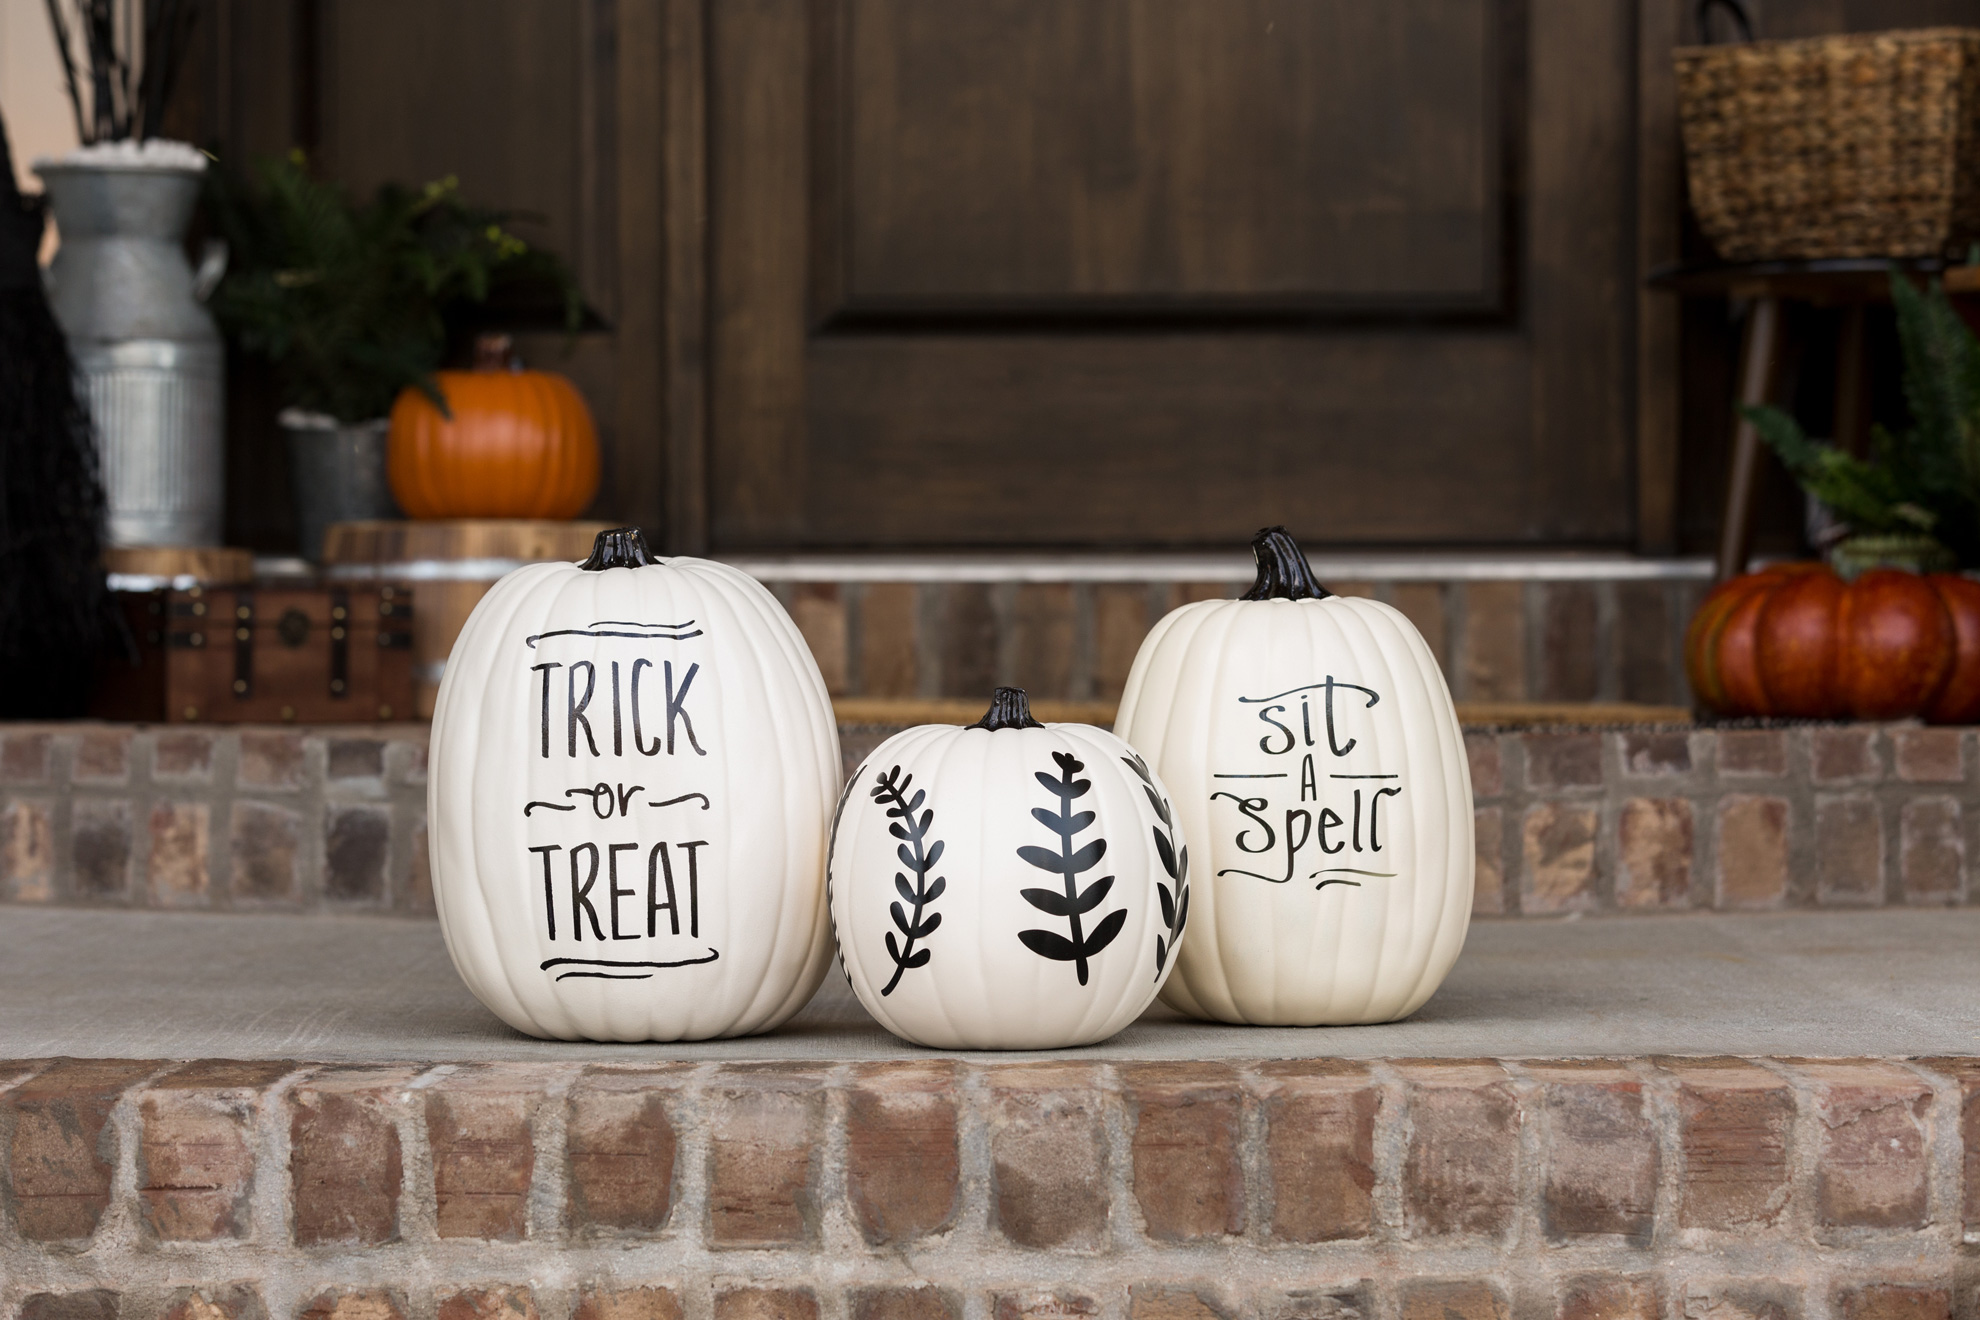 Decorated pumpkins sitting on an outdoor step